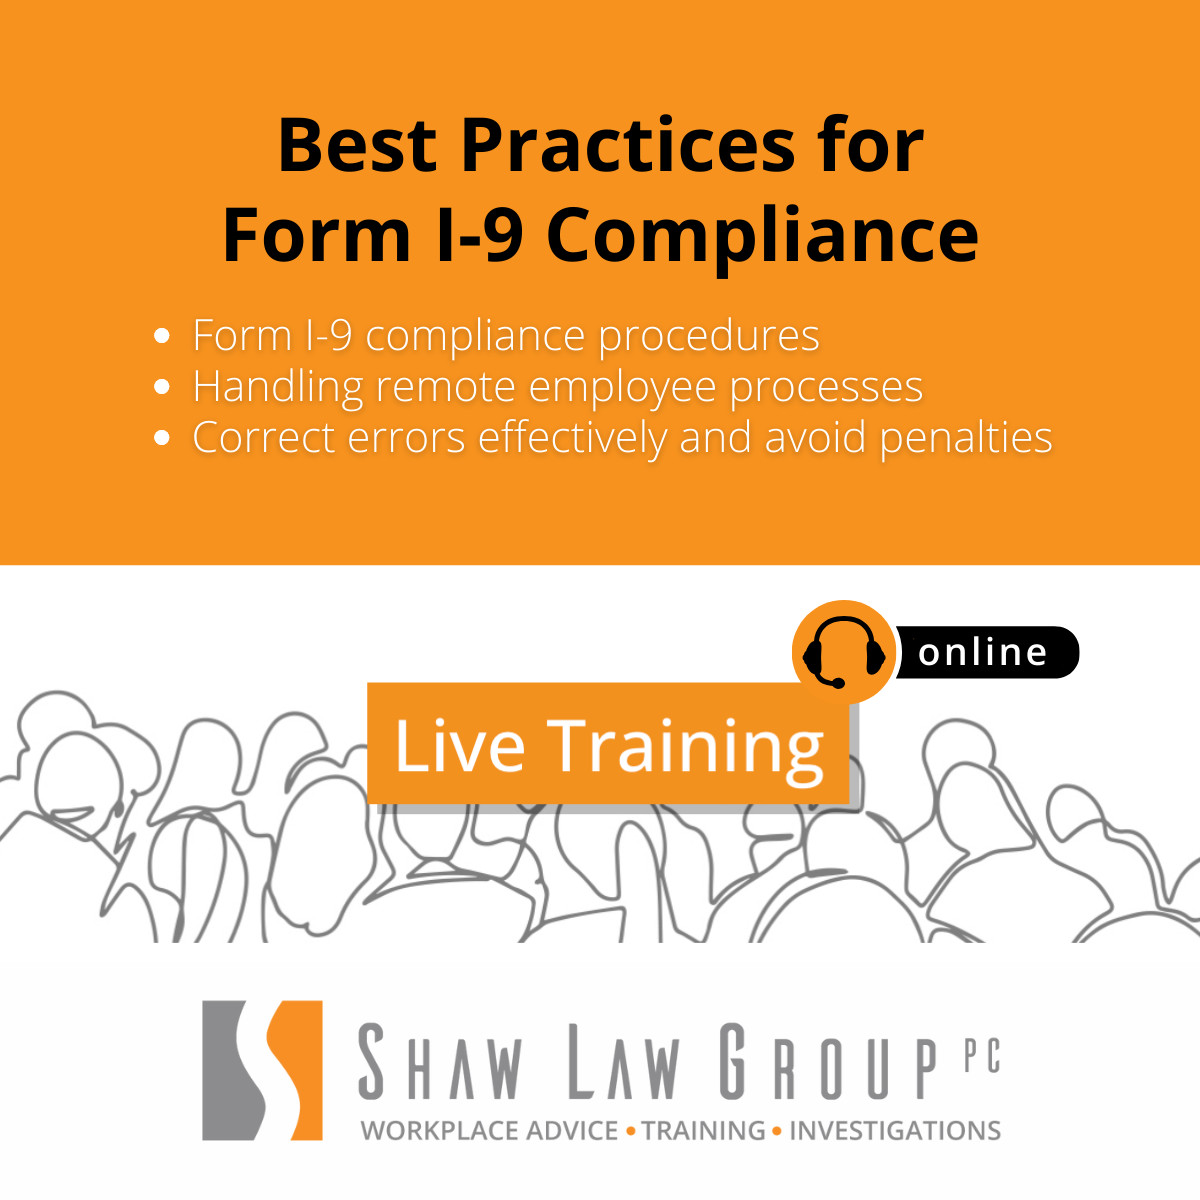 It's the last day to register: Form I-9 training for all HR professionals and managers responsible for onboarding.

shawlawgroup.com/course/best-pr…

#HRTraining #ComplianceTraining #FormI9 #HRCompliance #RemoteOnboarding